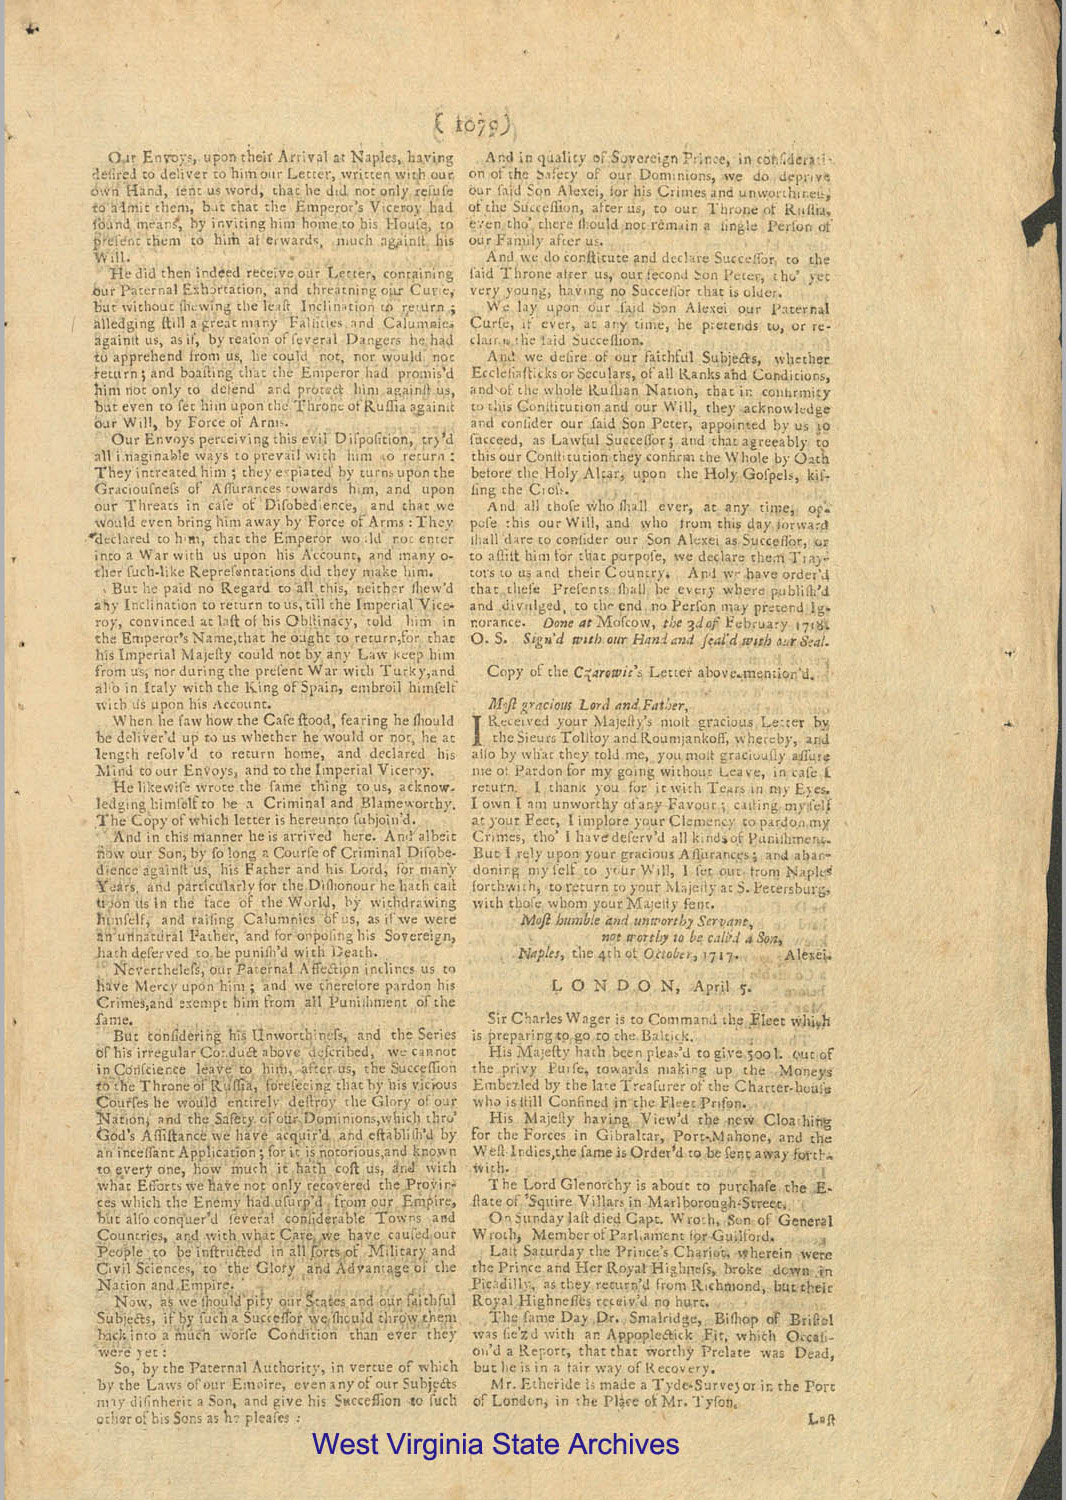 <i>The Original Weekly Journal</i> (London, England) featuring an open letter from Peter the Great discussing the actions of son Alexi, 1718. (MN-20)